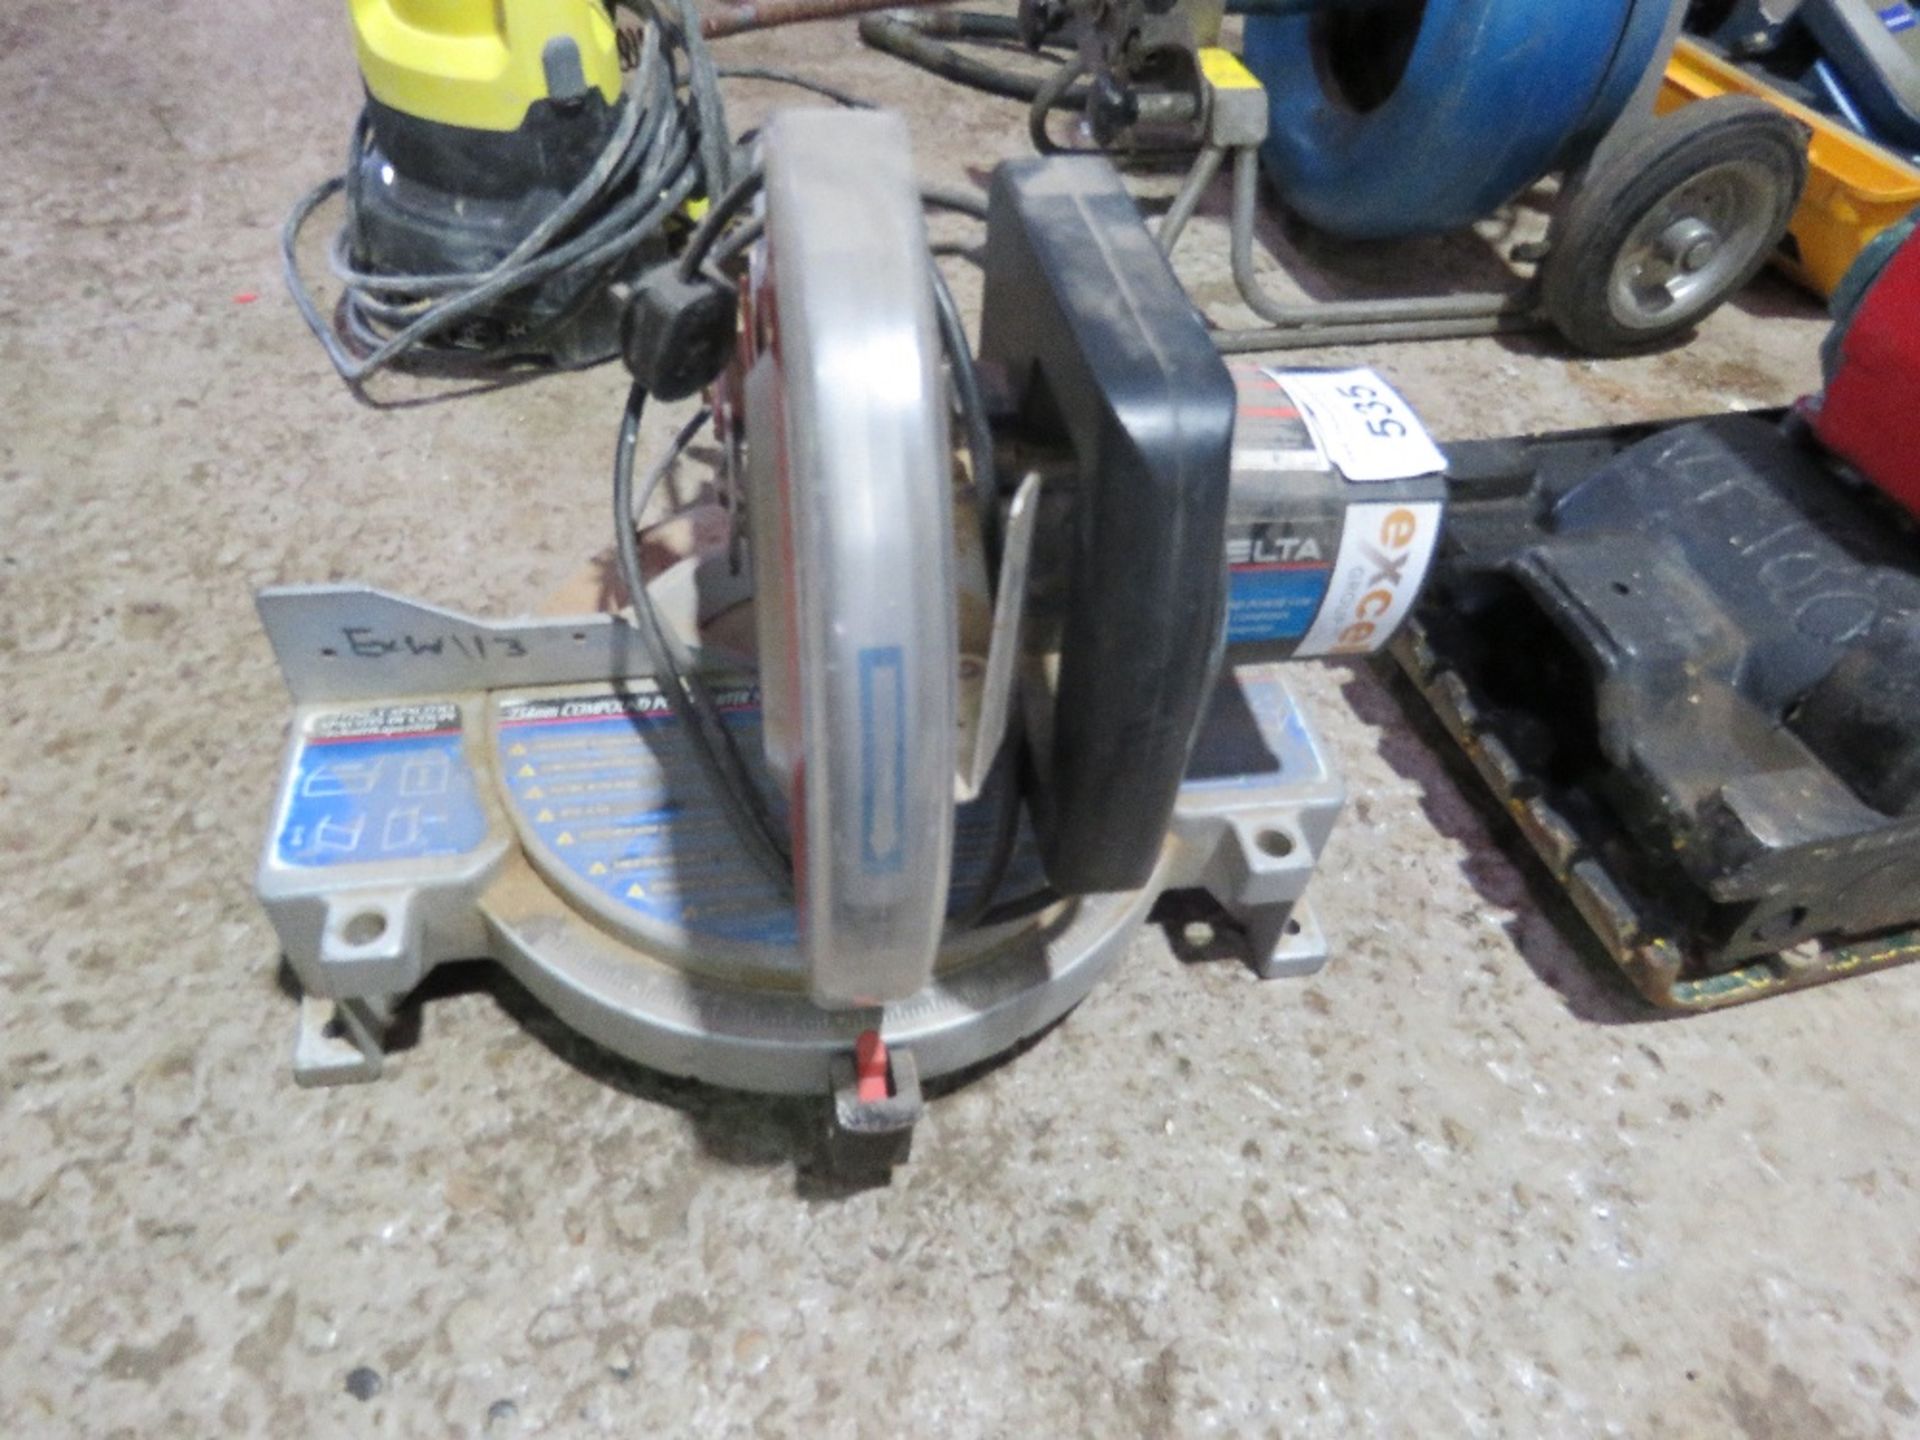 DELTA COMPOUND MITRE SAW, 240VOLT. SOURCED FROM COMPANY LIQUIDATION. THIS LOT IS SOLD UNDER THE AU - Image 2 of 3